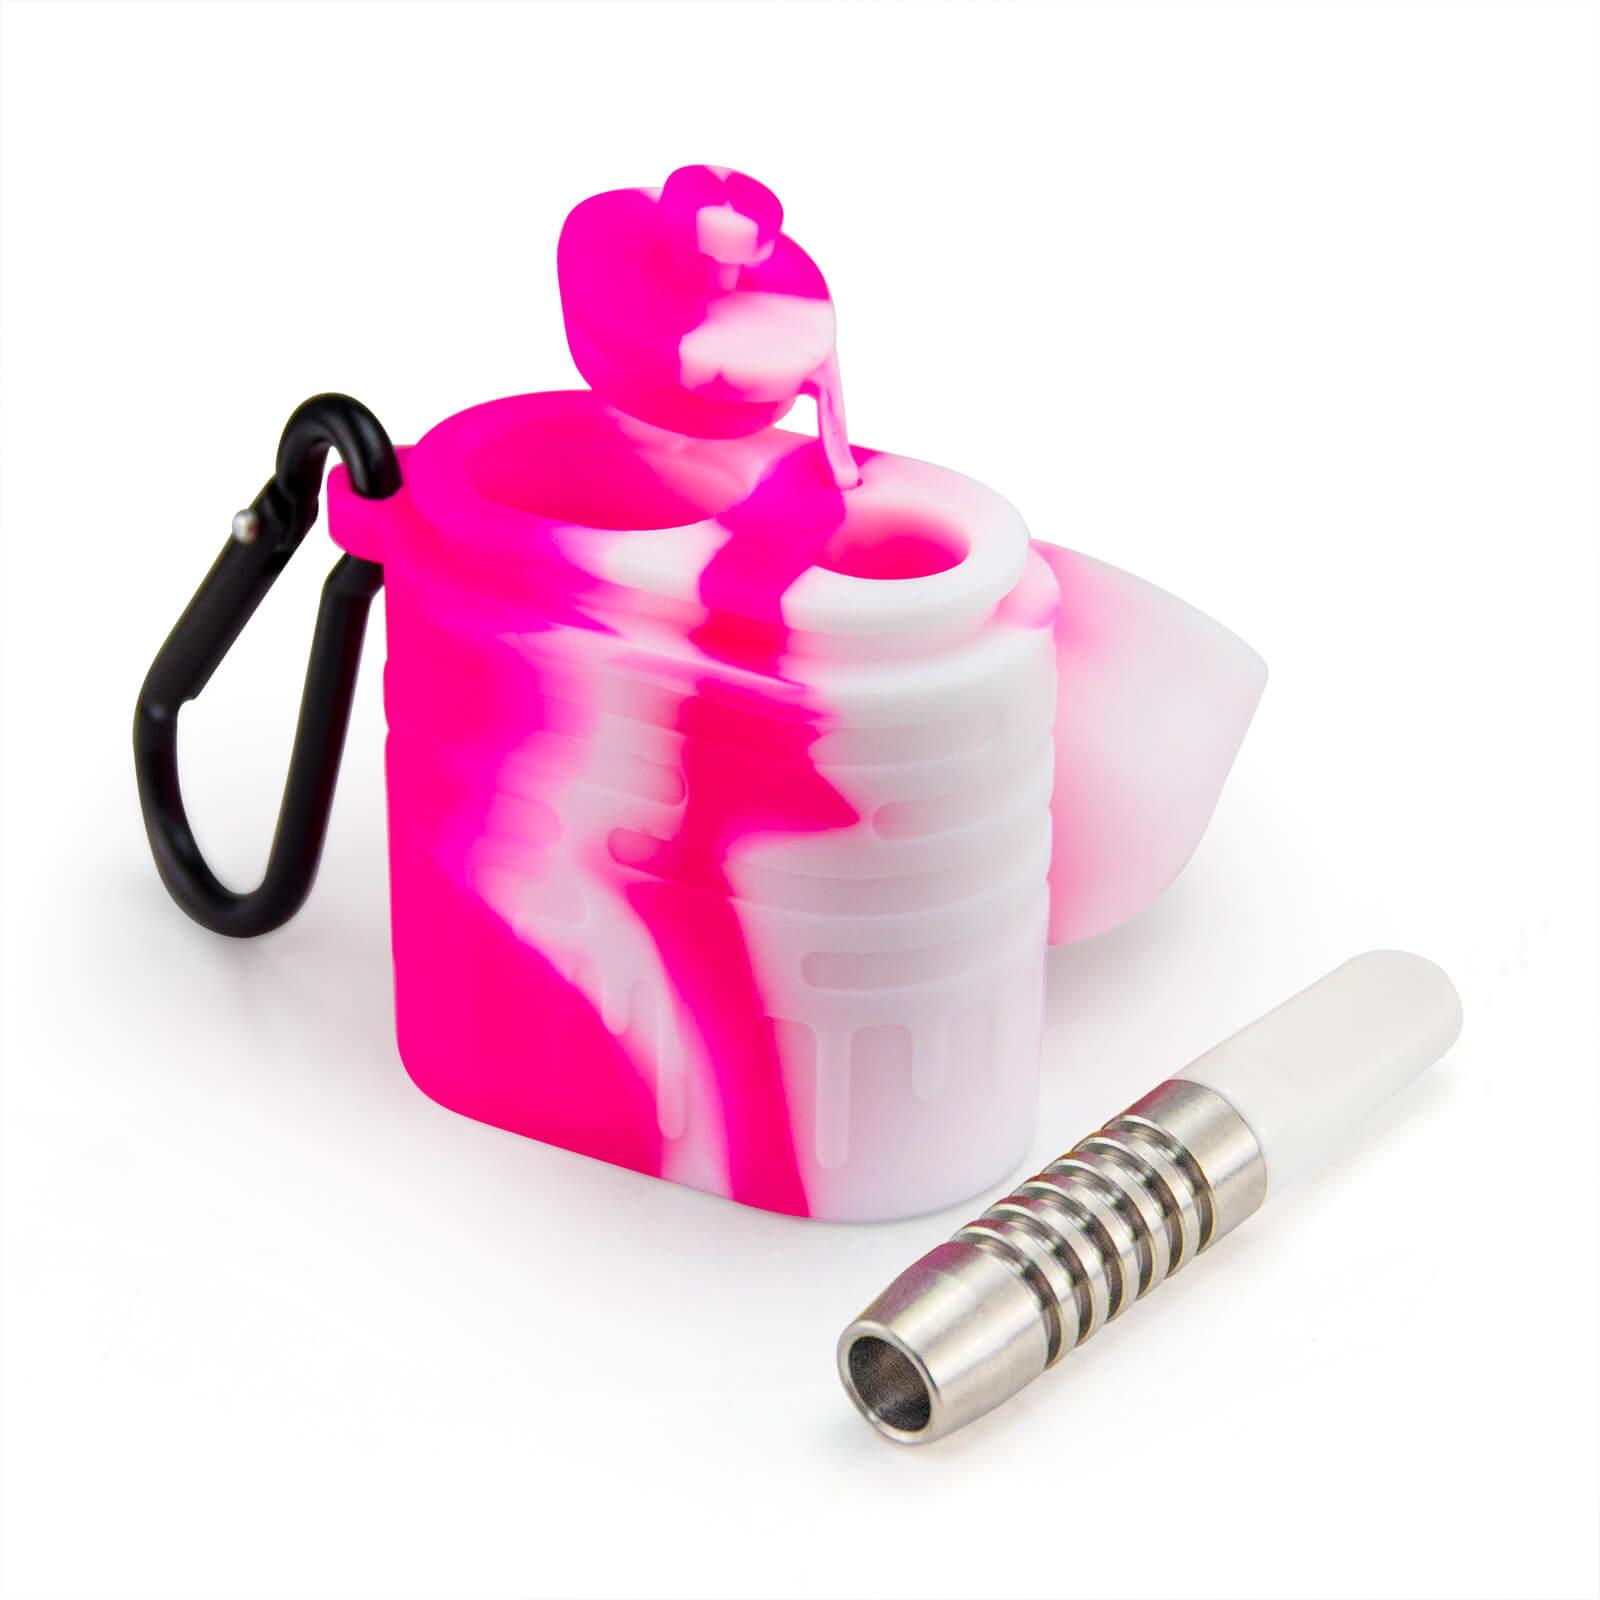 Silicone Dugout One Hitter Set Pink